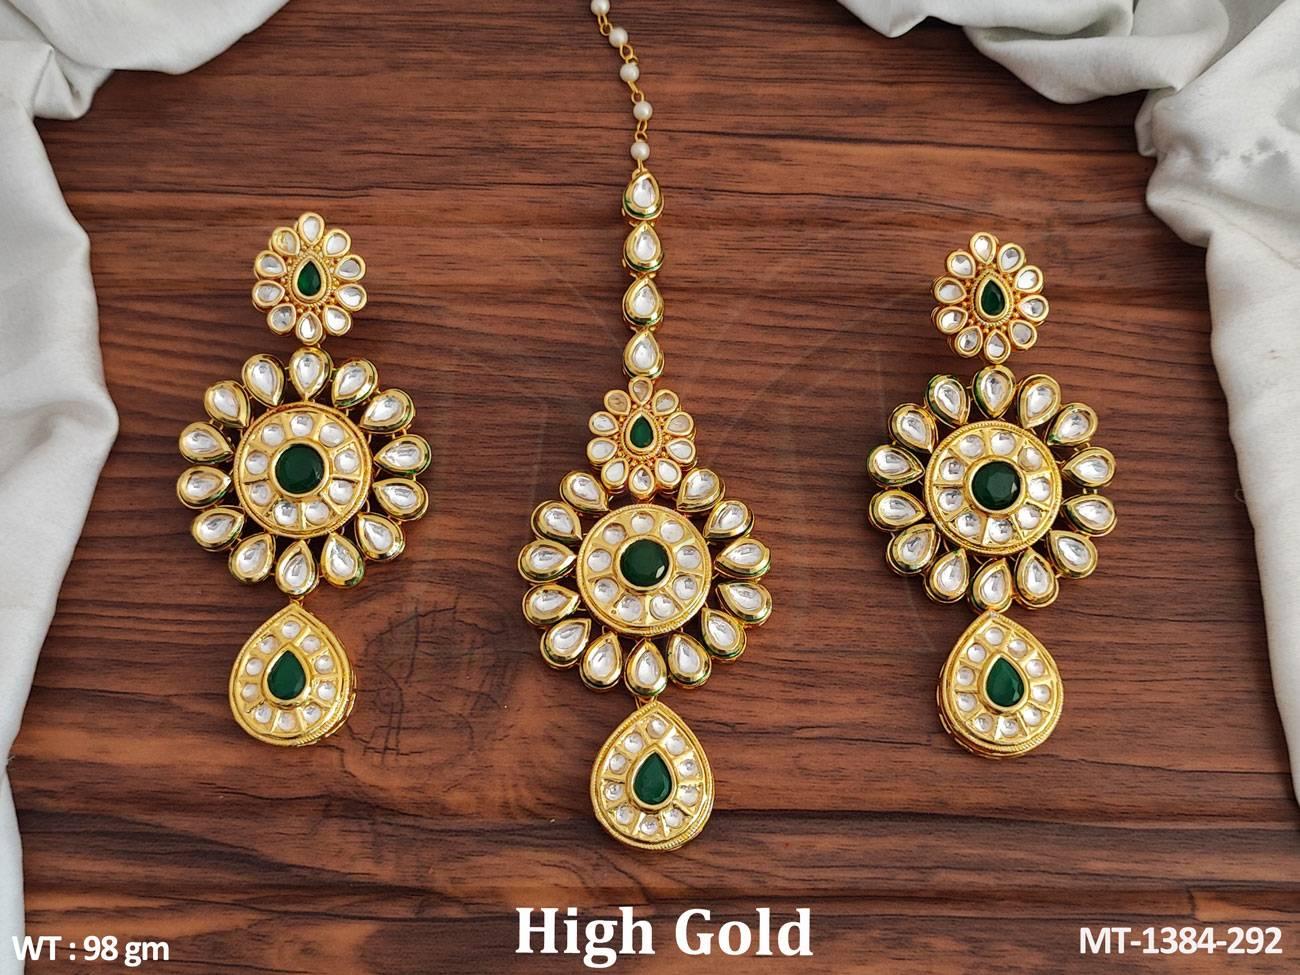 This fancy design kundan maang tikka with earrings set is crafted with high-quality brass metal and is elegantly polished with high gold.